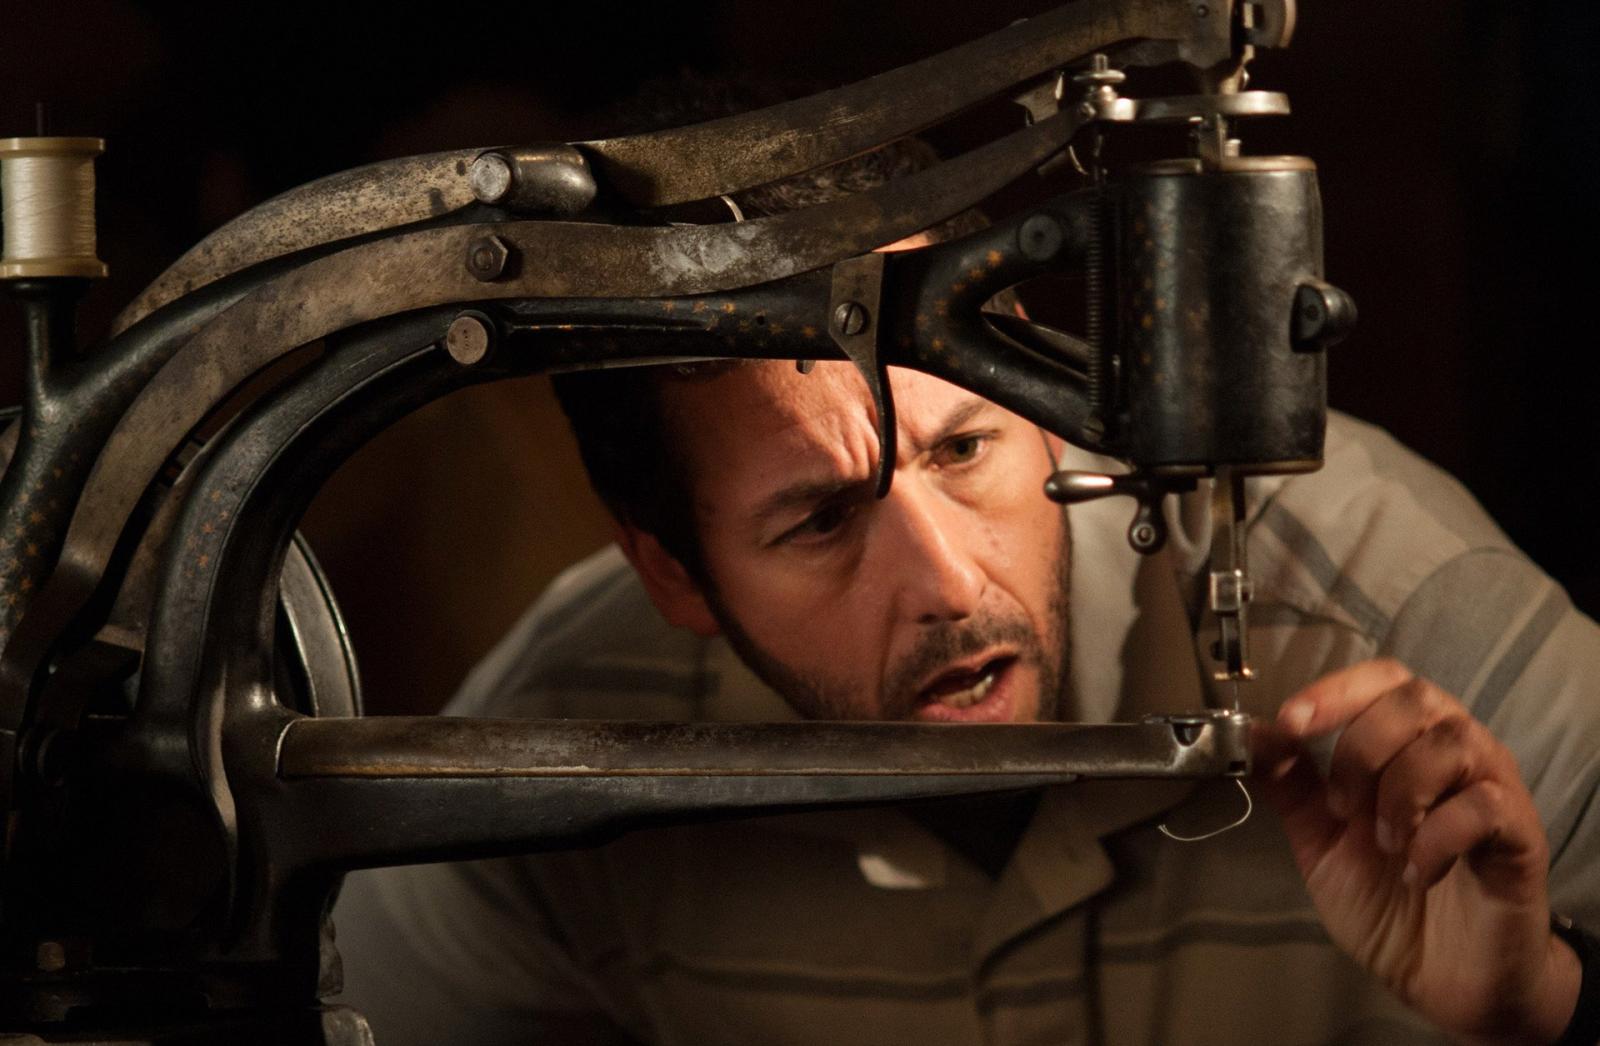 8 Worst Adam Sandler Movies, Ranked From Bad to Absolute Disaster - image 2